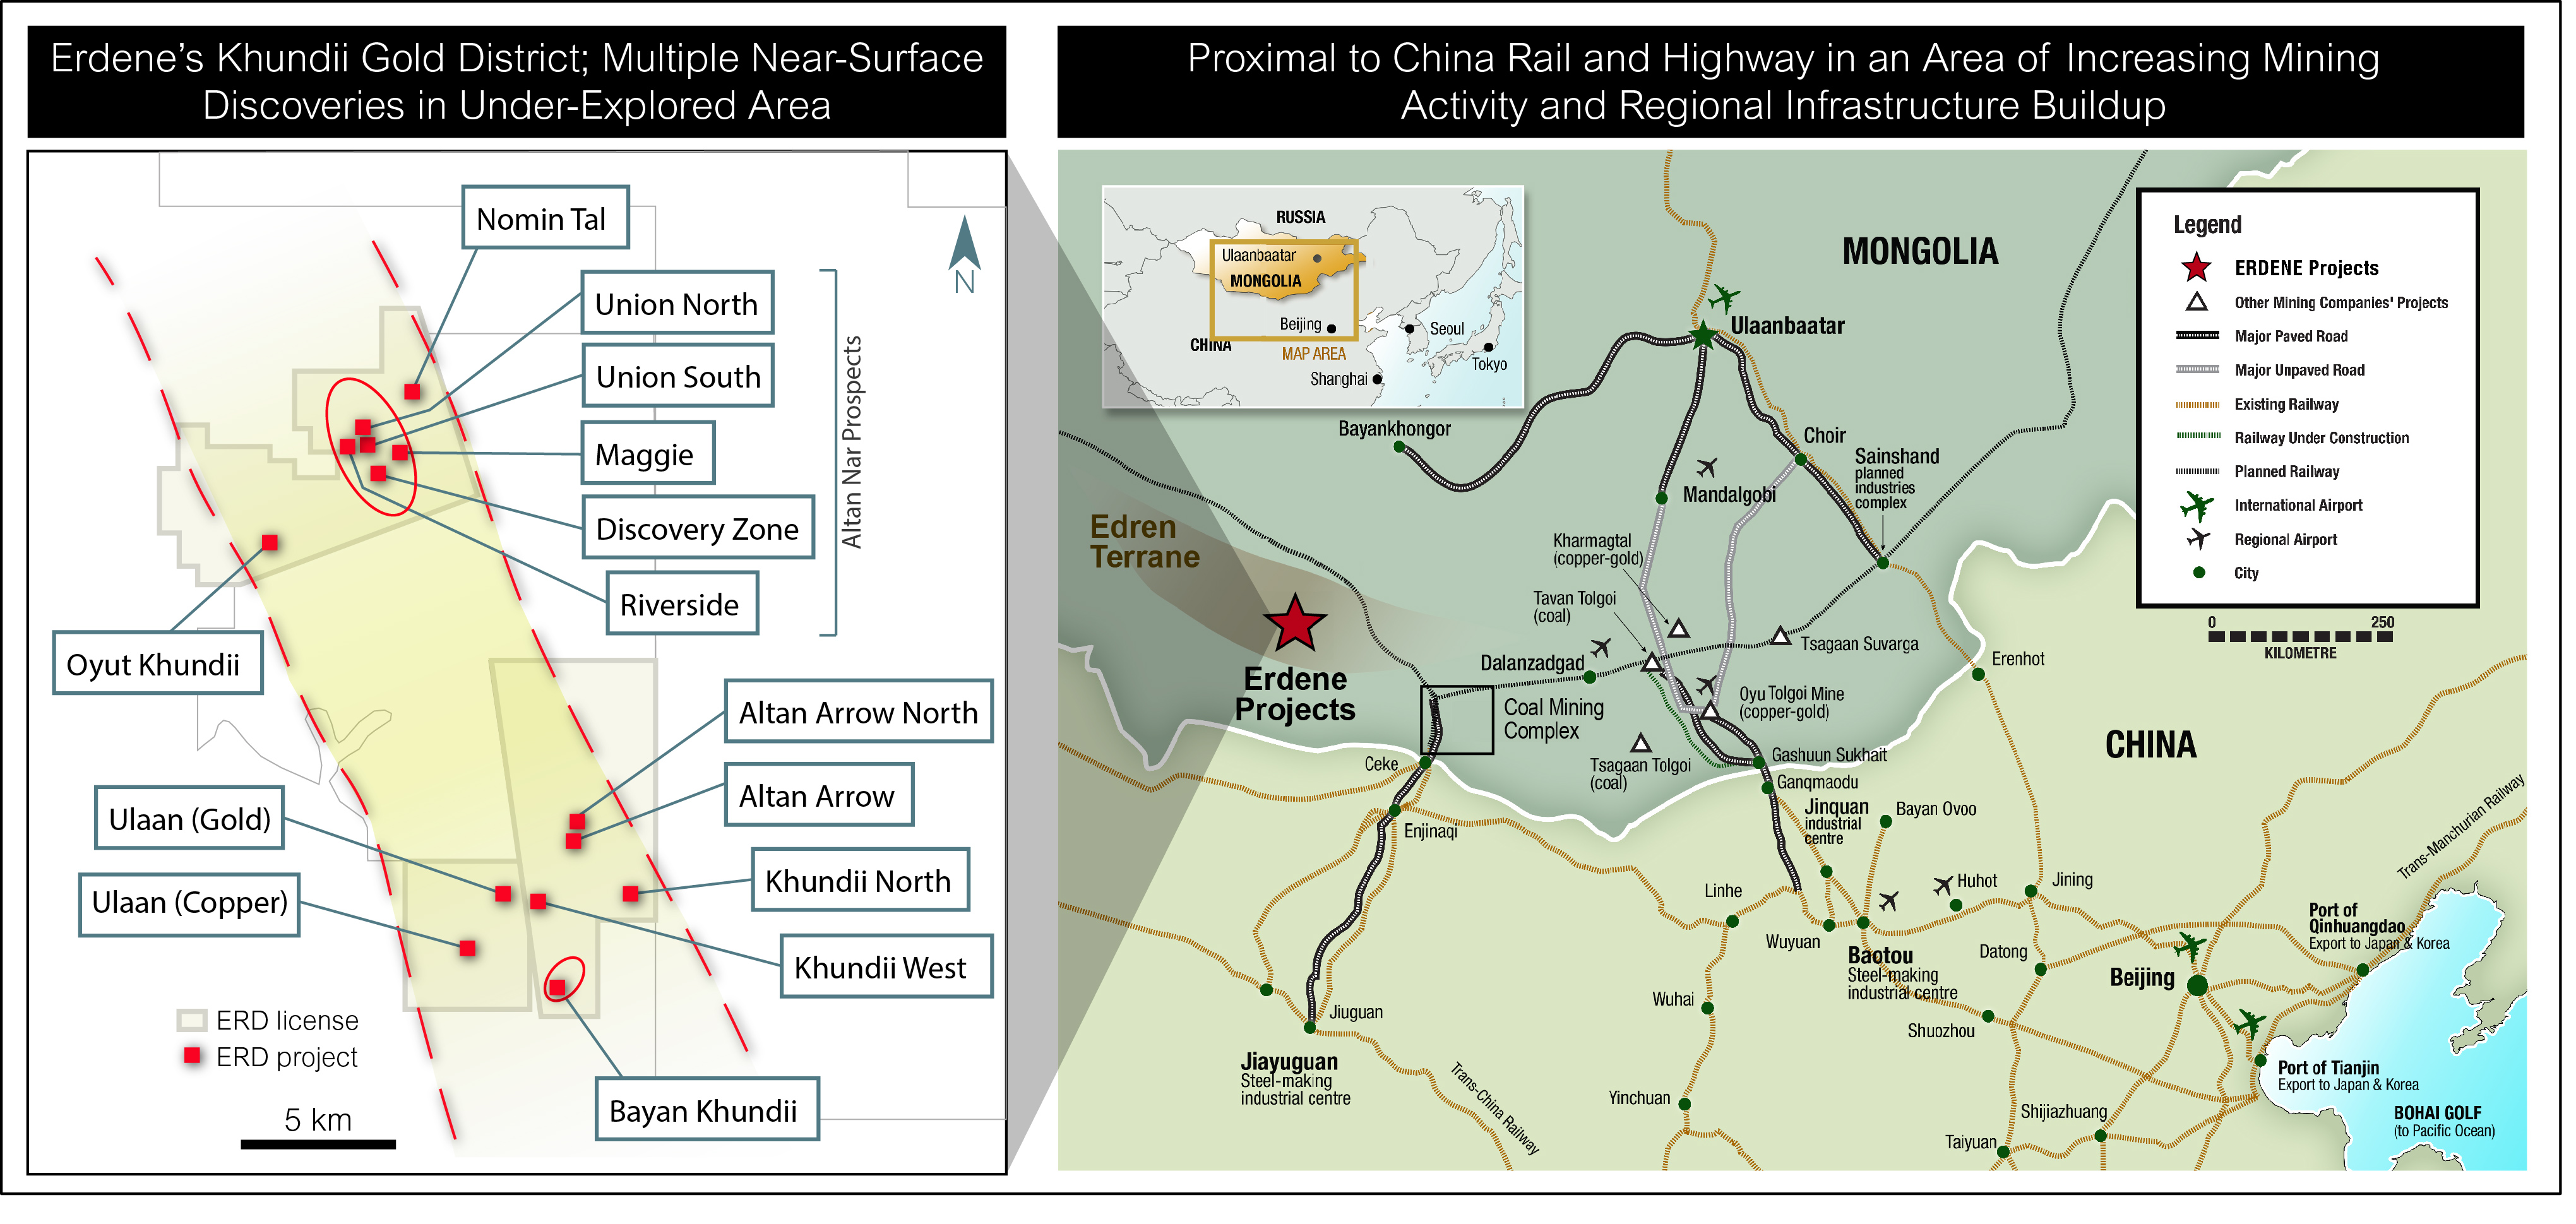 Erdene Project Locations Within The Khundii Gold District